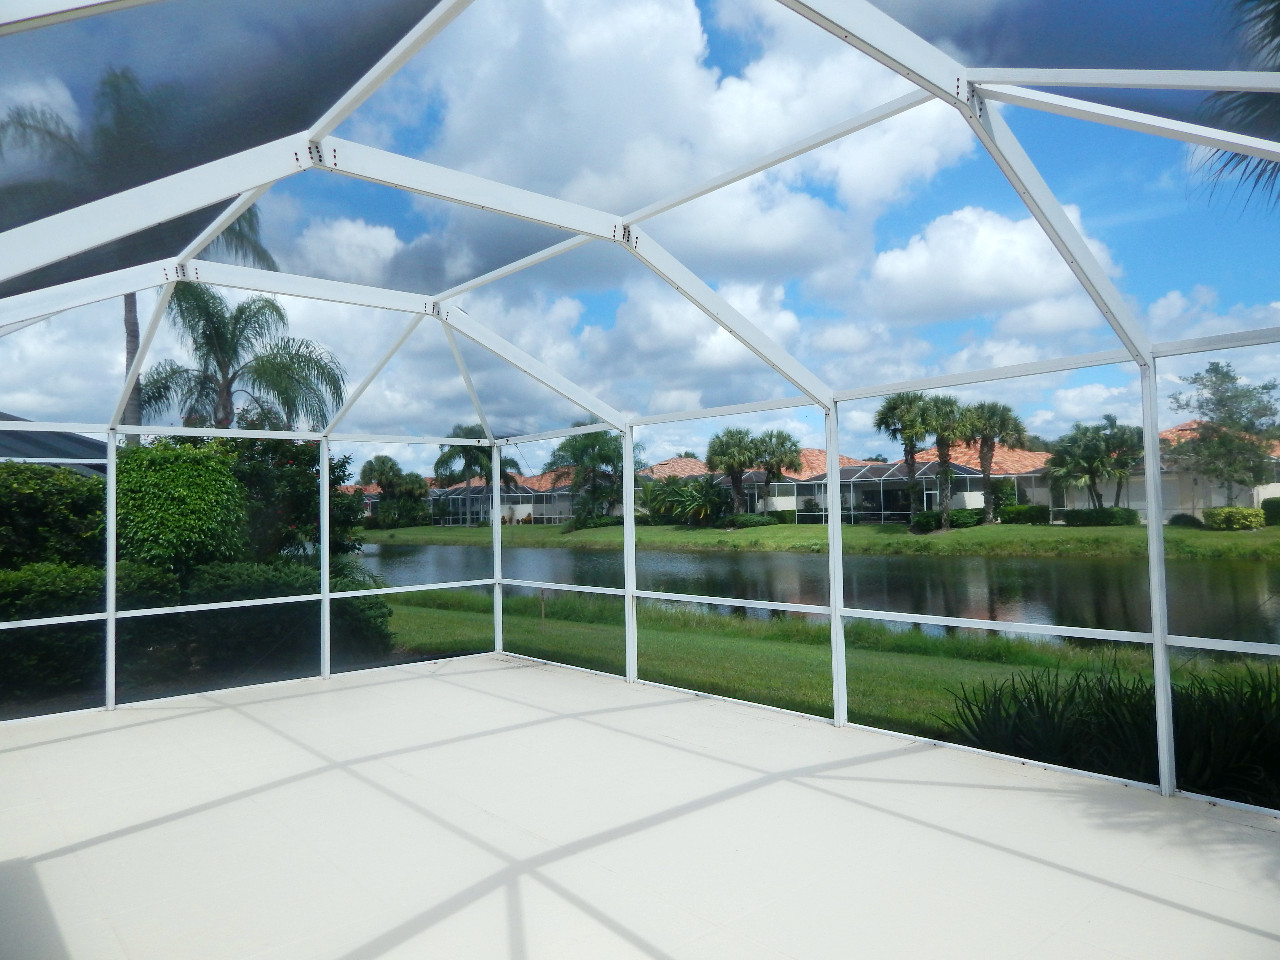 The image describes a screened patio and a lake view